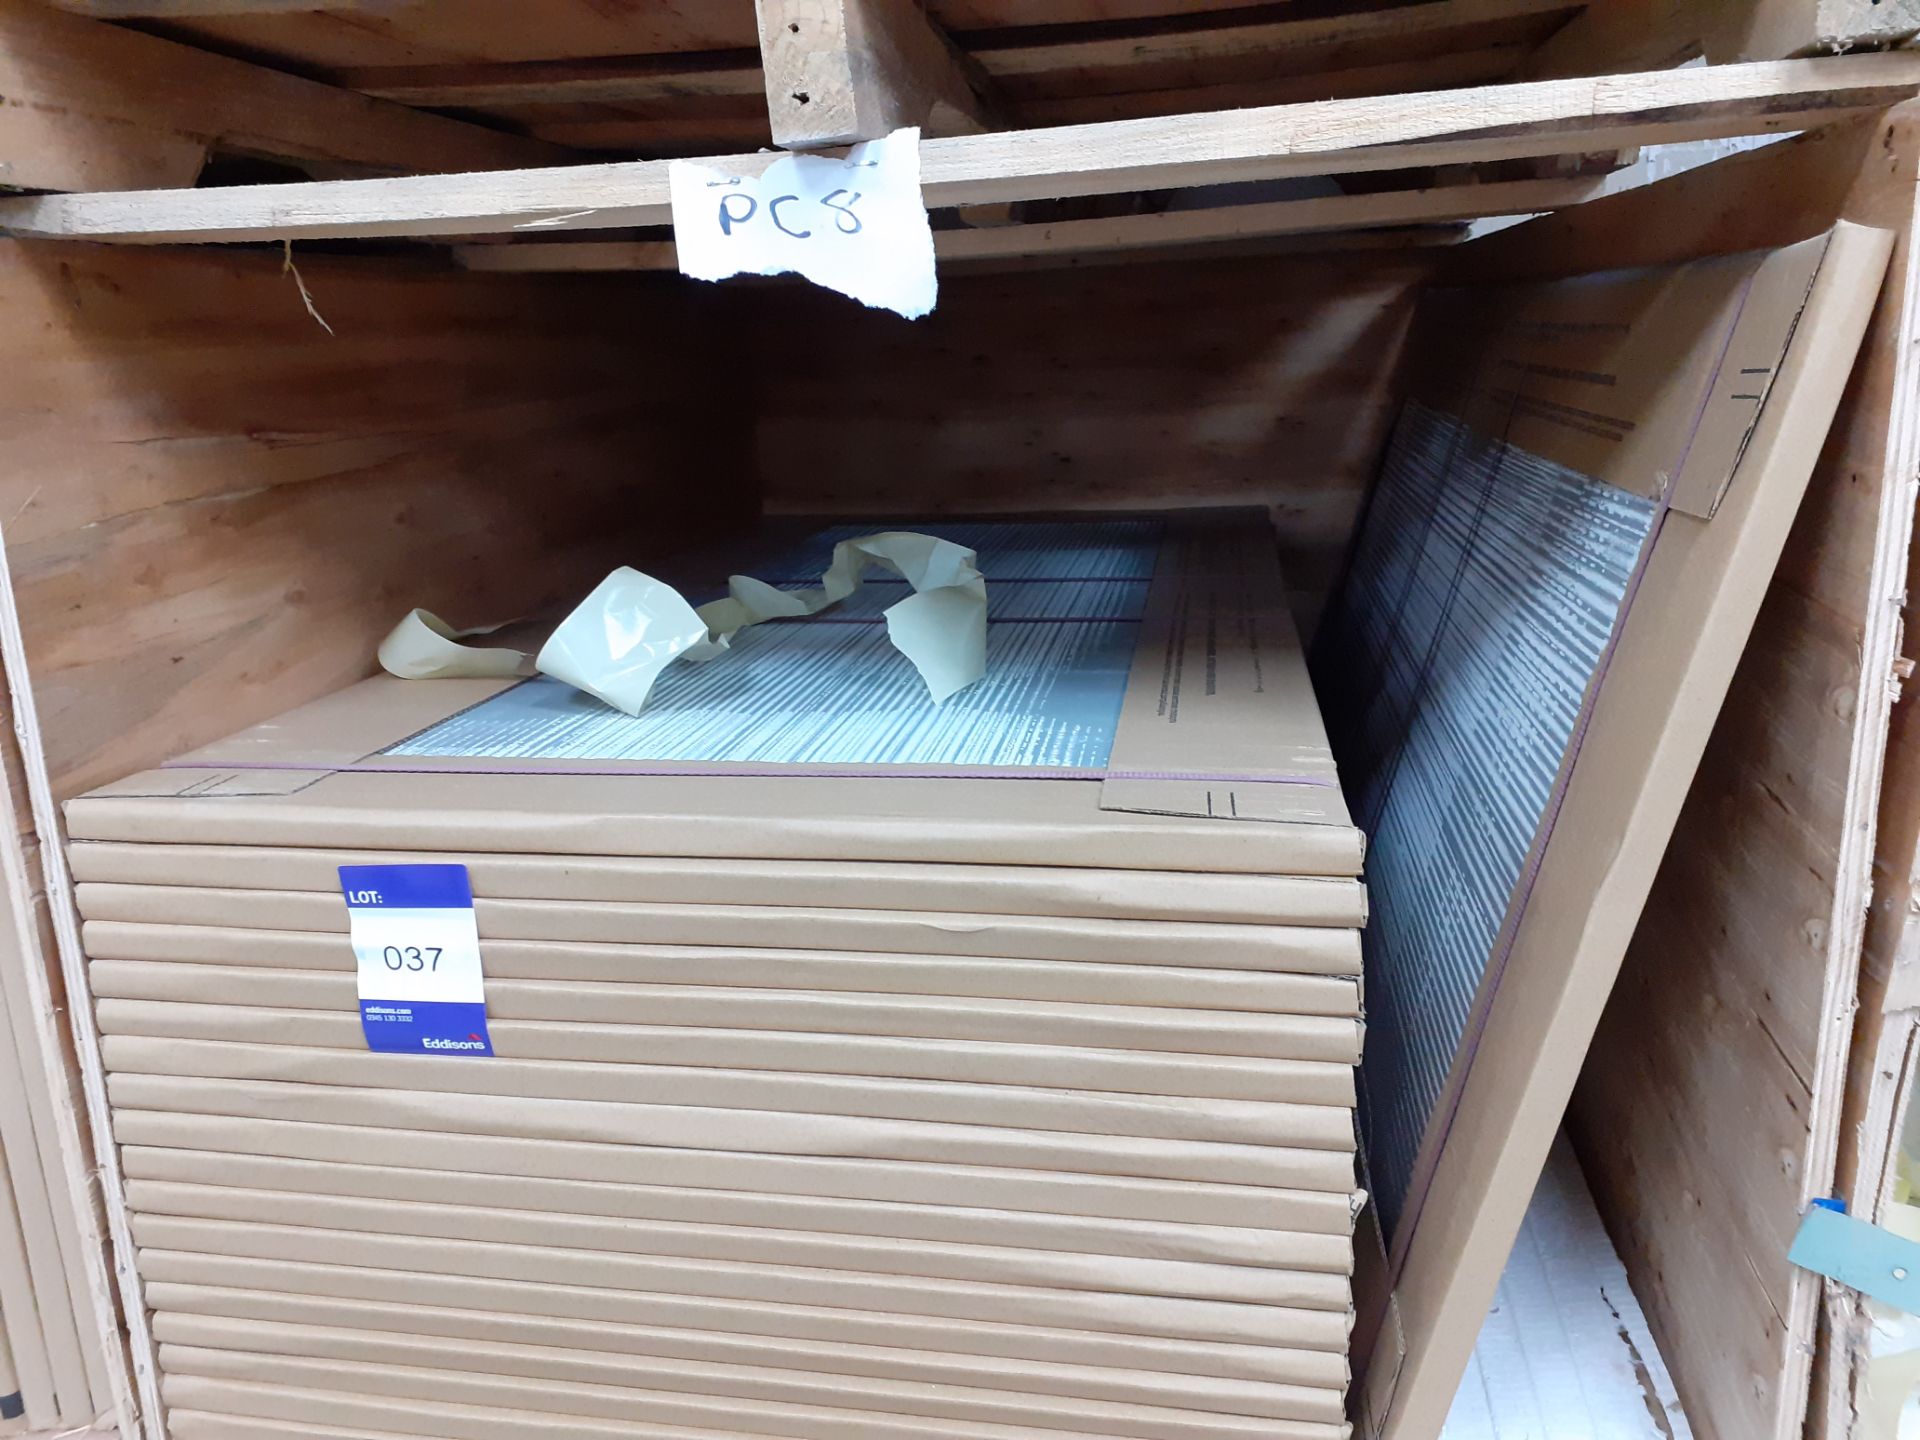 19 boxes x 3 of PC8 Tiles 600x1200x4.8mm, 5 boxes x 3 of C4 Tiles 600x1200x4.8mm & 3 boxes x 3 of C2